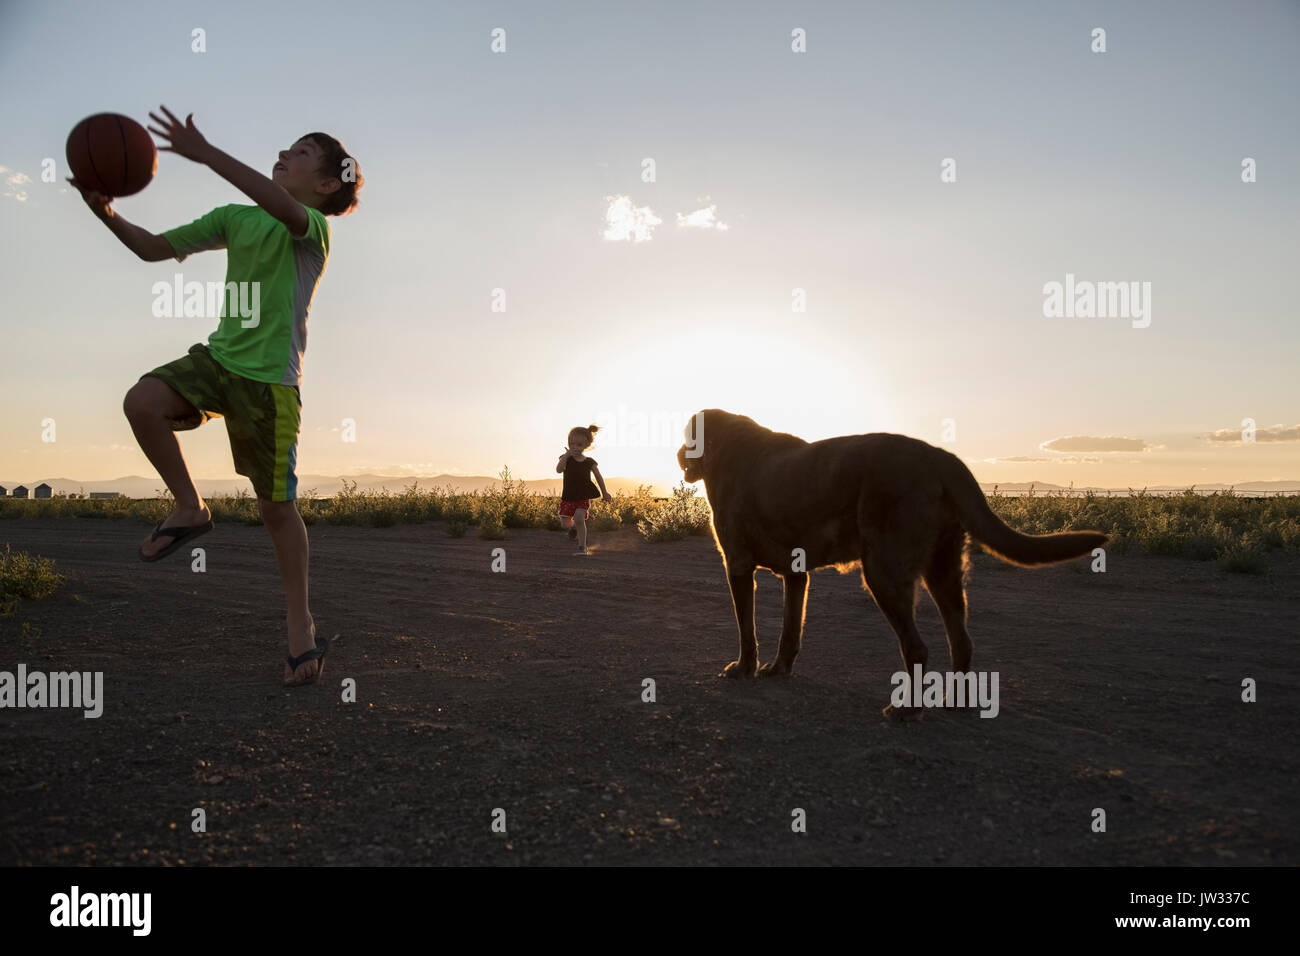 USA, Colorado, Boy (8-9) playing ball next to chocolate Labrador and little girl (4-5) running in background Stock Photo